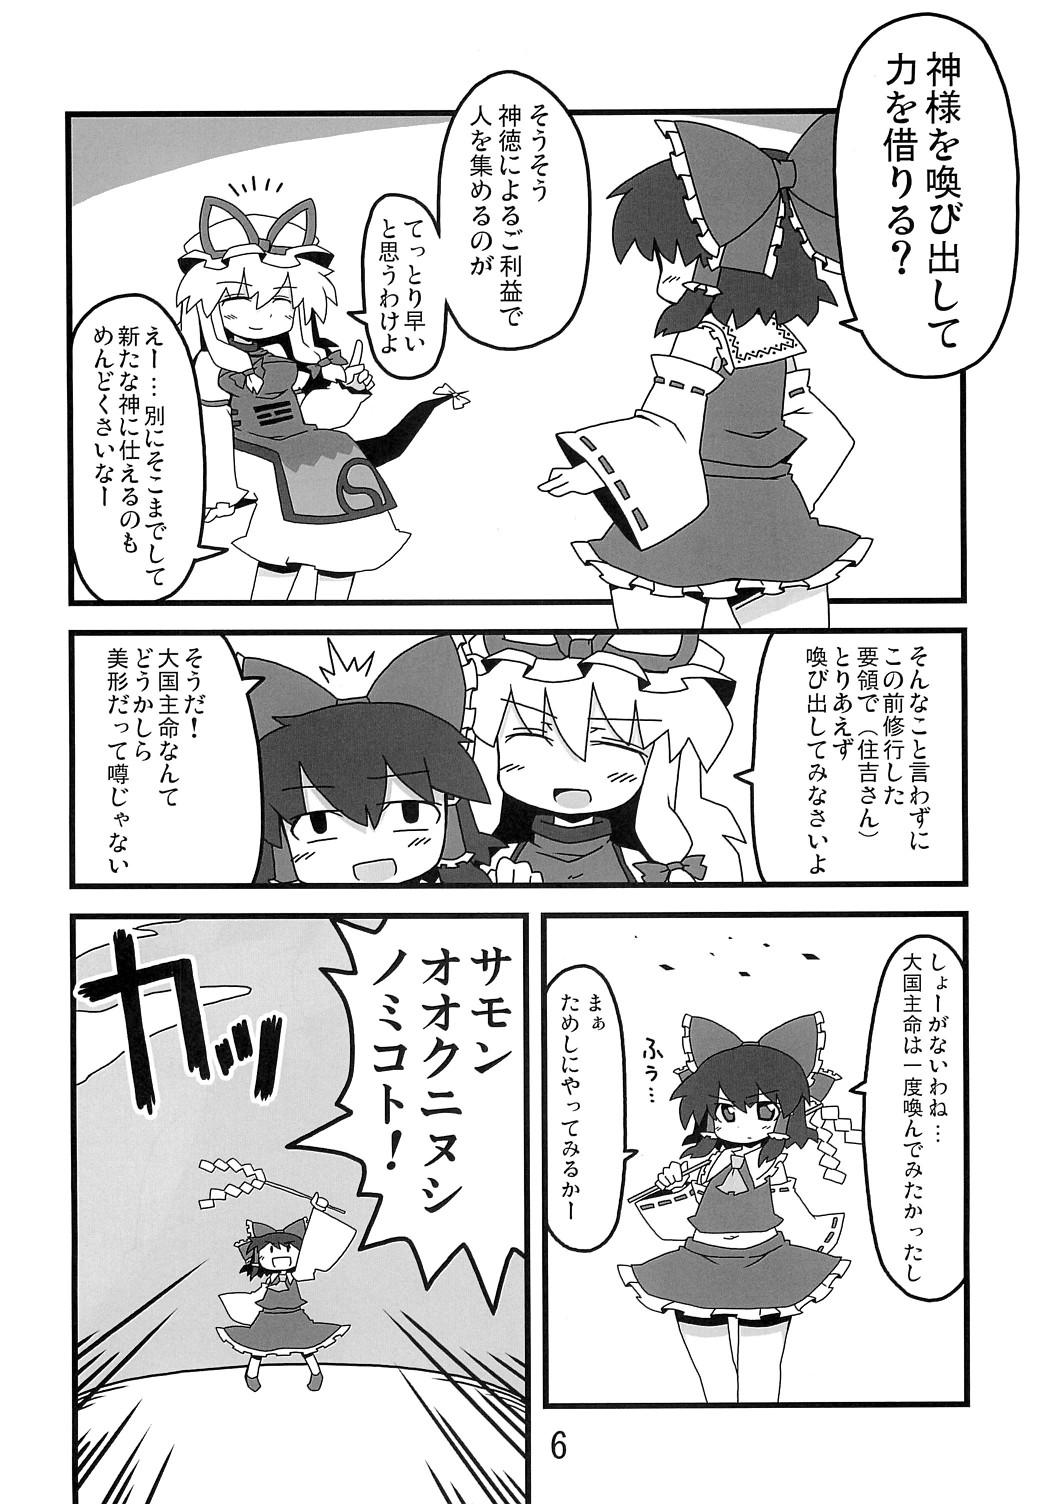 Tan 東方豊年祭 - Touhou project Amateurporn - Page 5